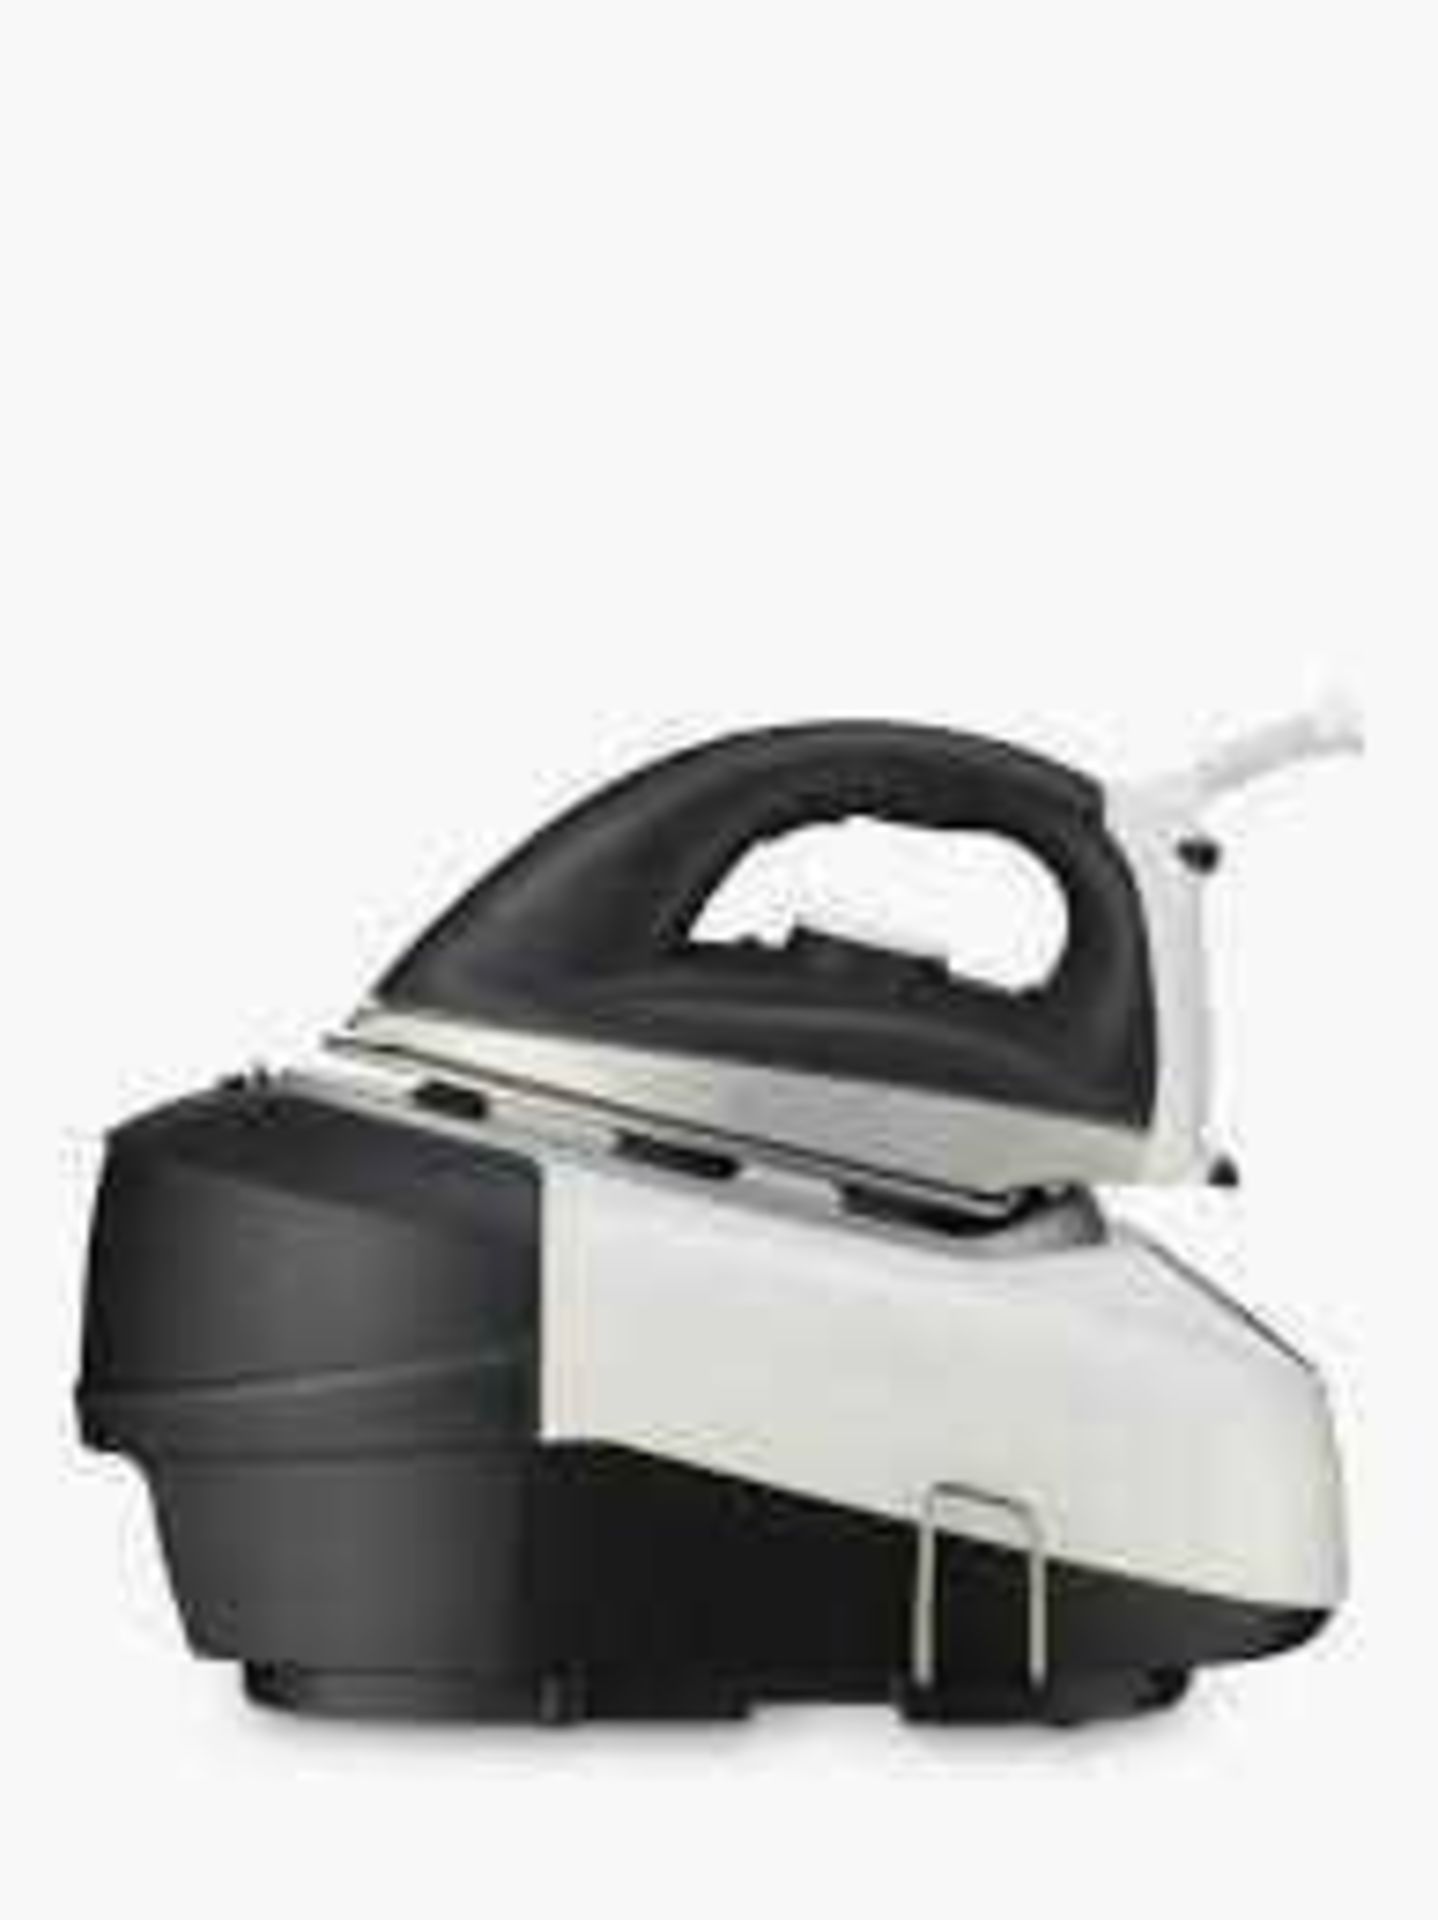 RRP £100 Unboxed John Lewis Power Steam Generating Iron In Black/White.